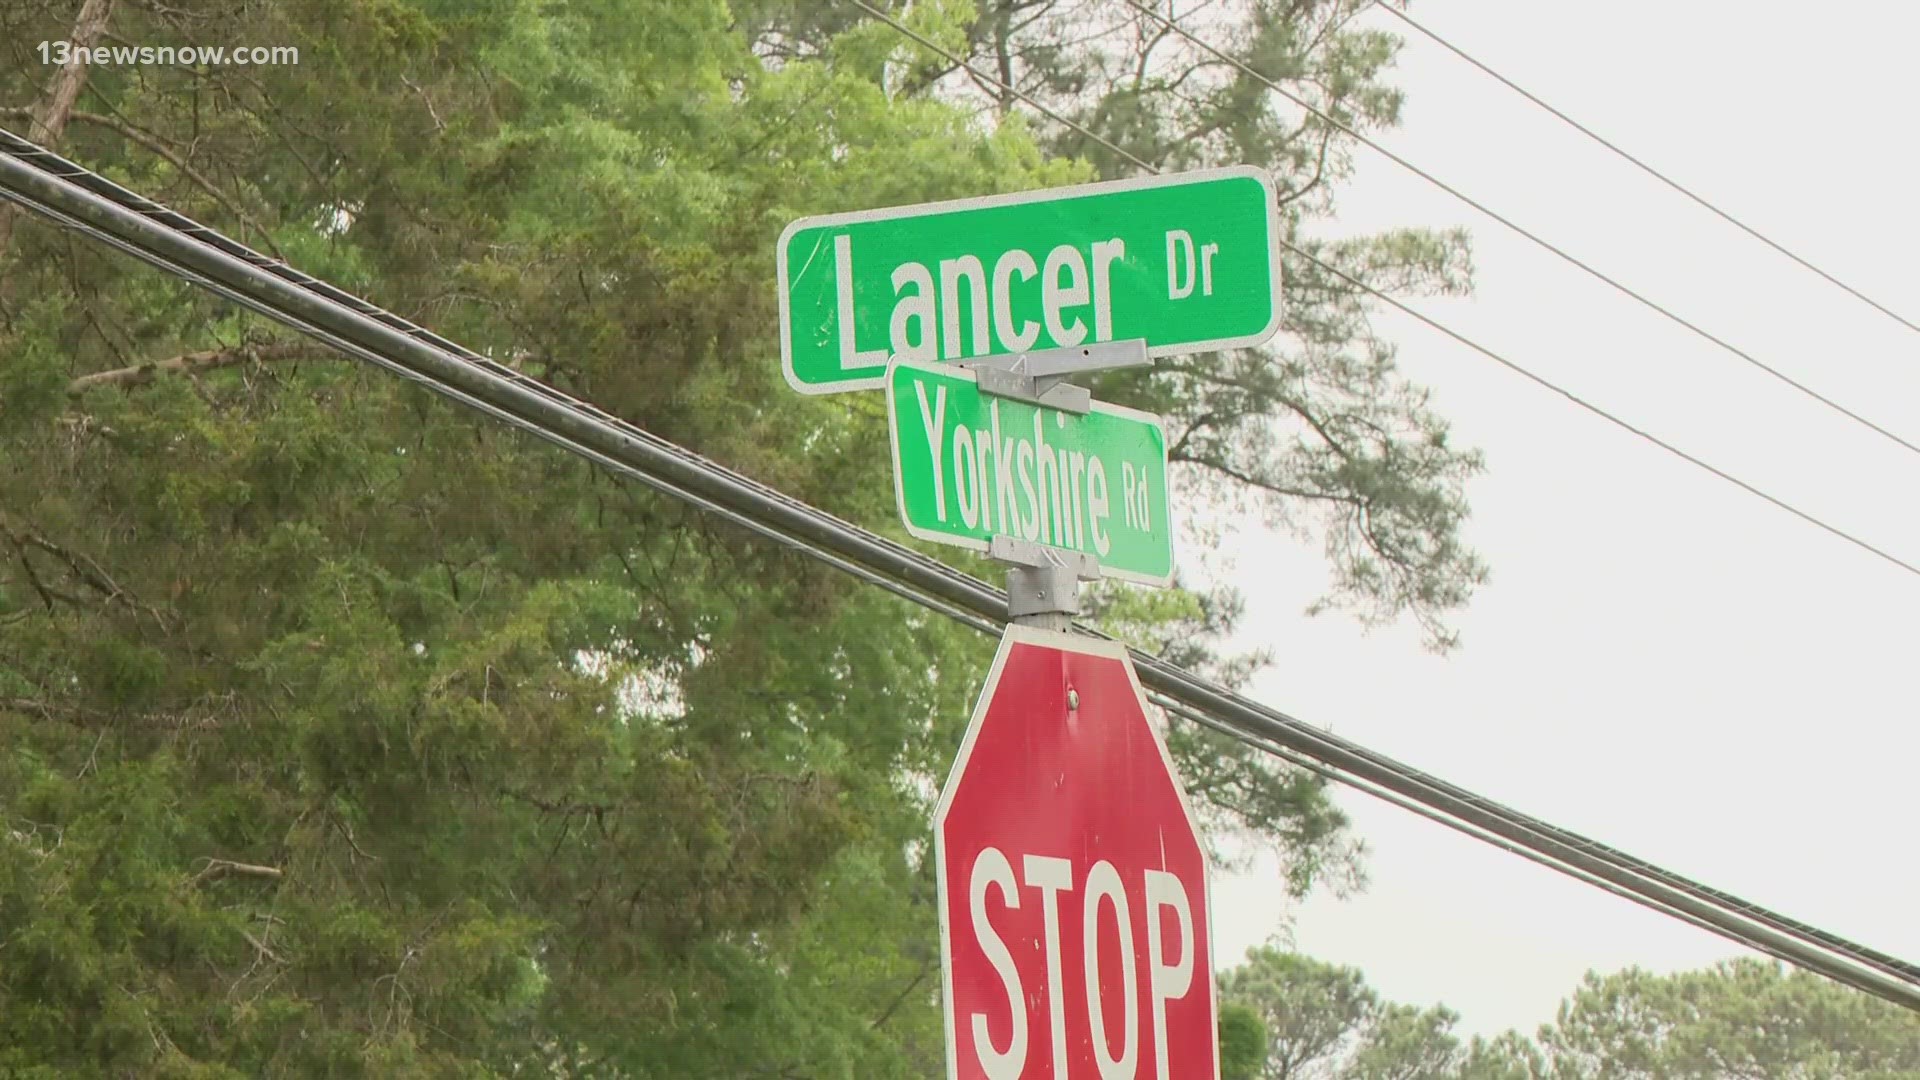 Police say it happened just before 1:30 Saturday morning near the intersection of Lancer Drive and Yorkshire Road.